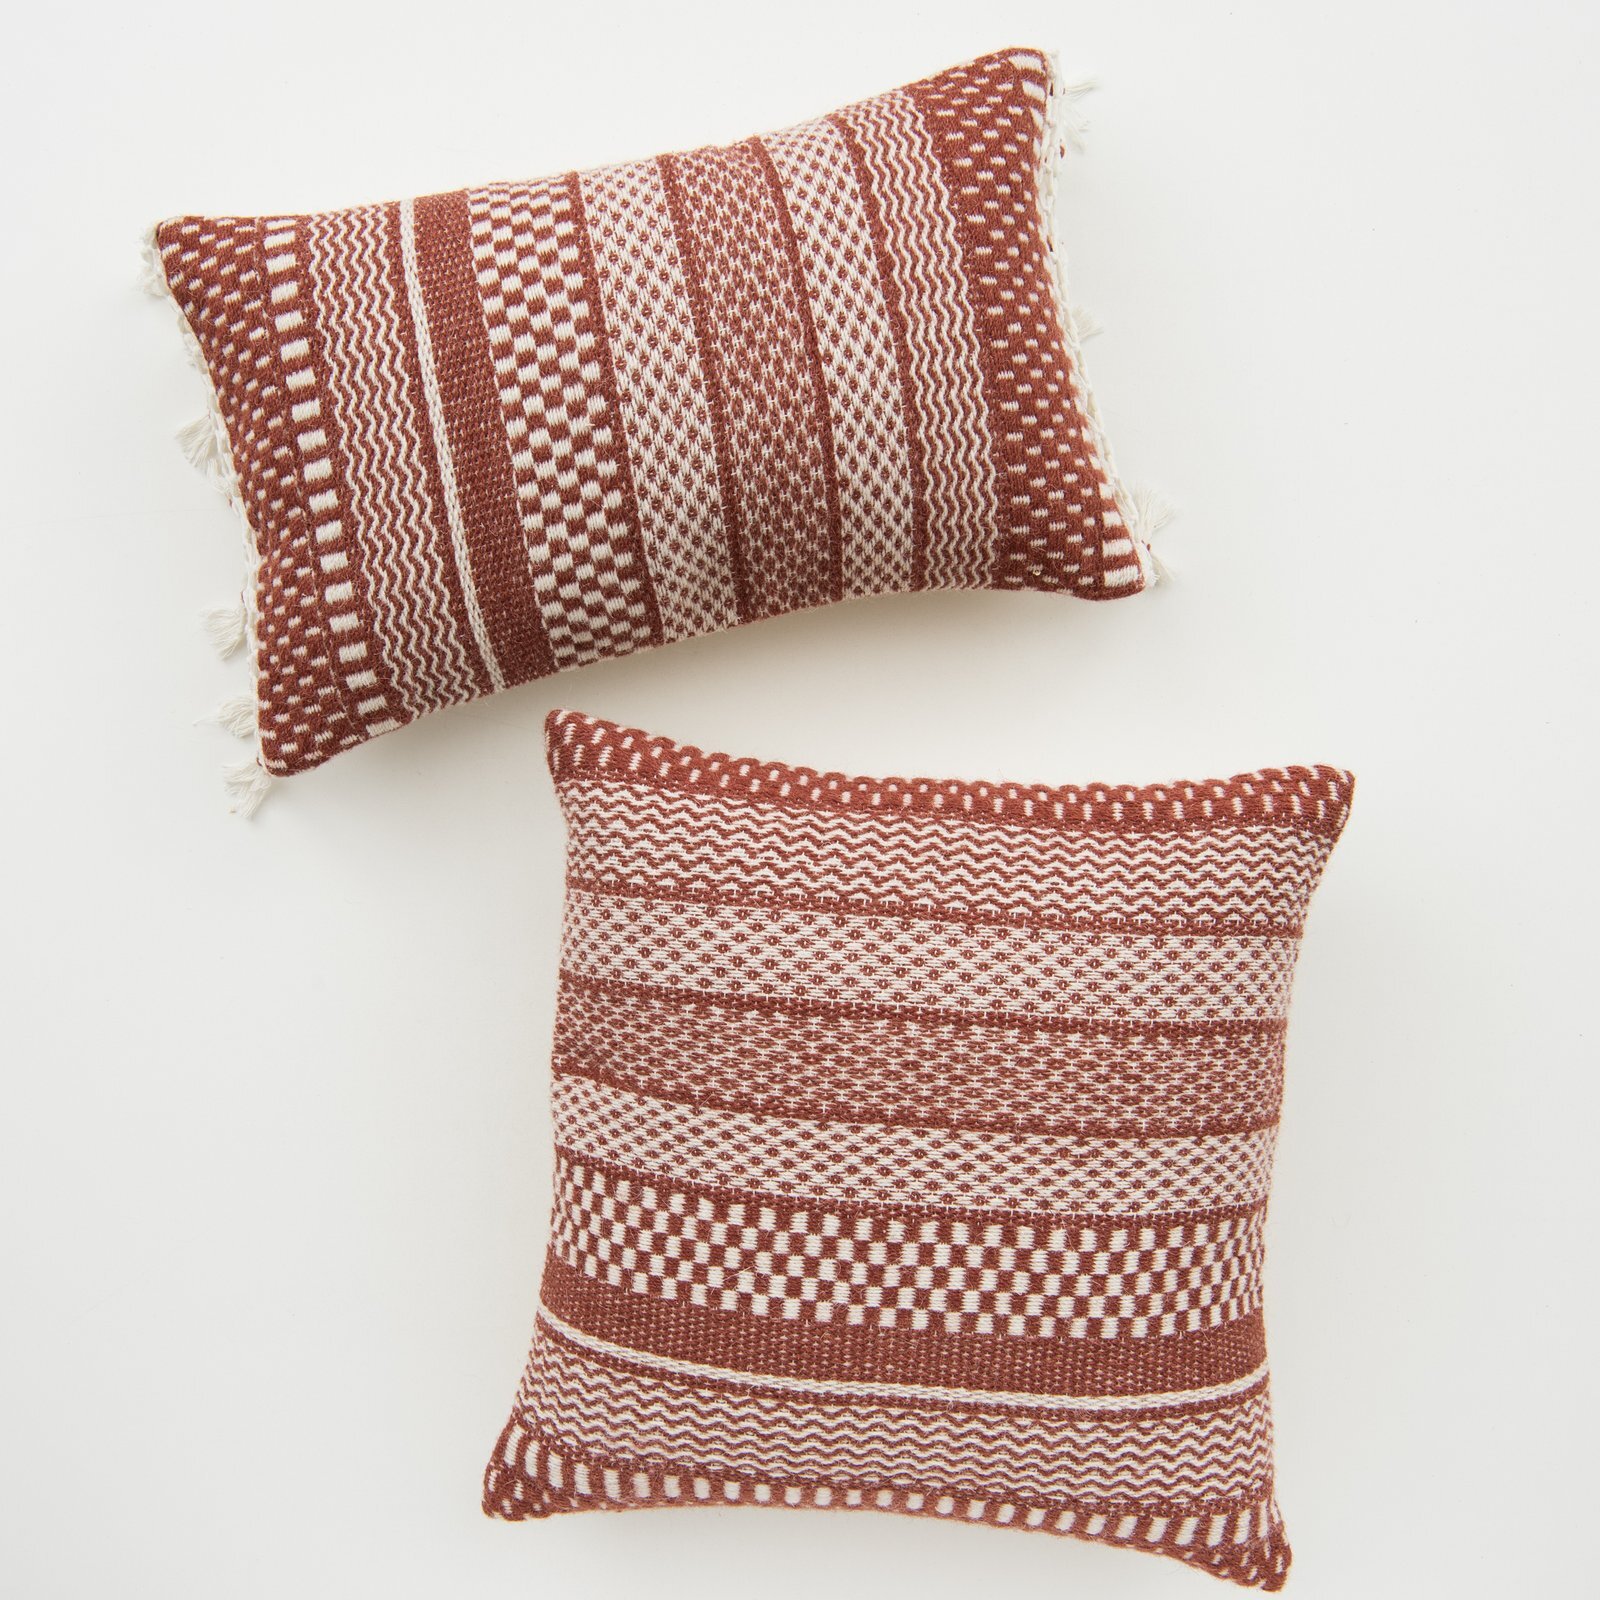 red-and-white-striped-pattern-pillow-mikey_1600x.jpg